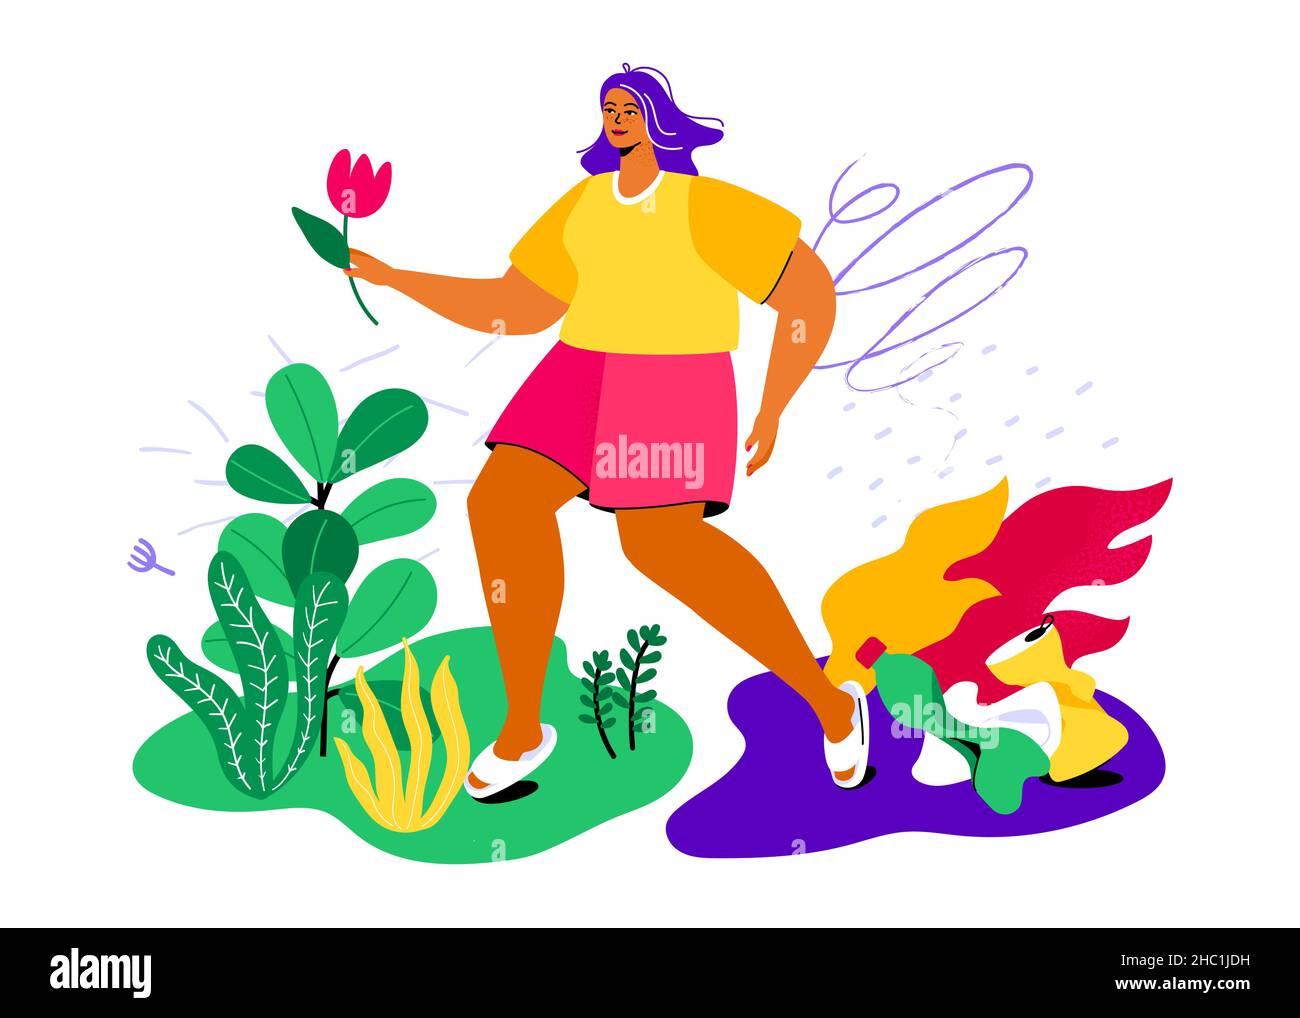 Eco lifestyle - colorful flat design style illustration. The girl running towards green field with plants, flowers, leaving plastic bottles, cans, and Stock Vector